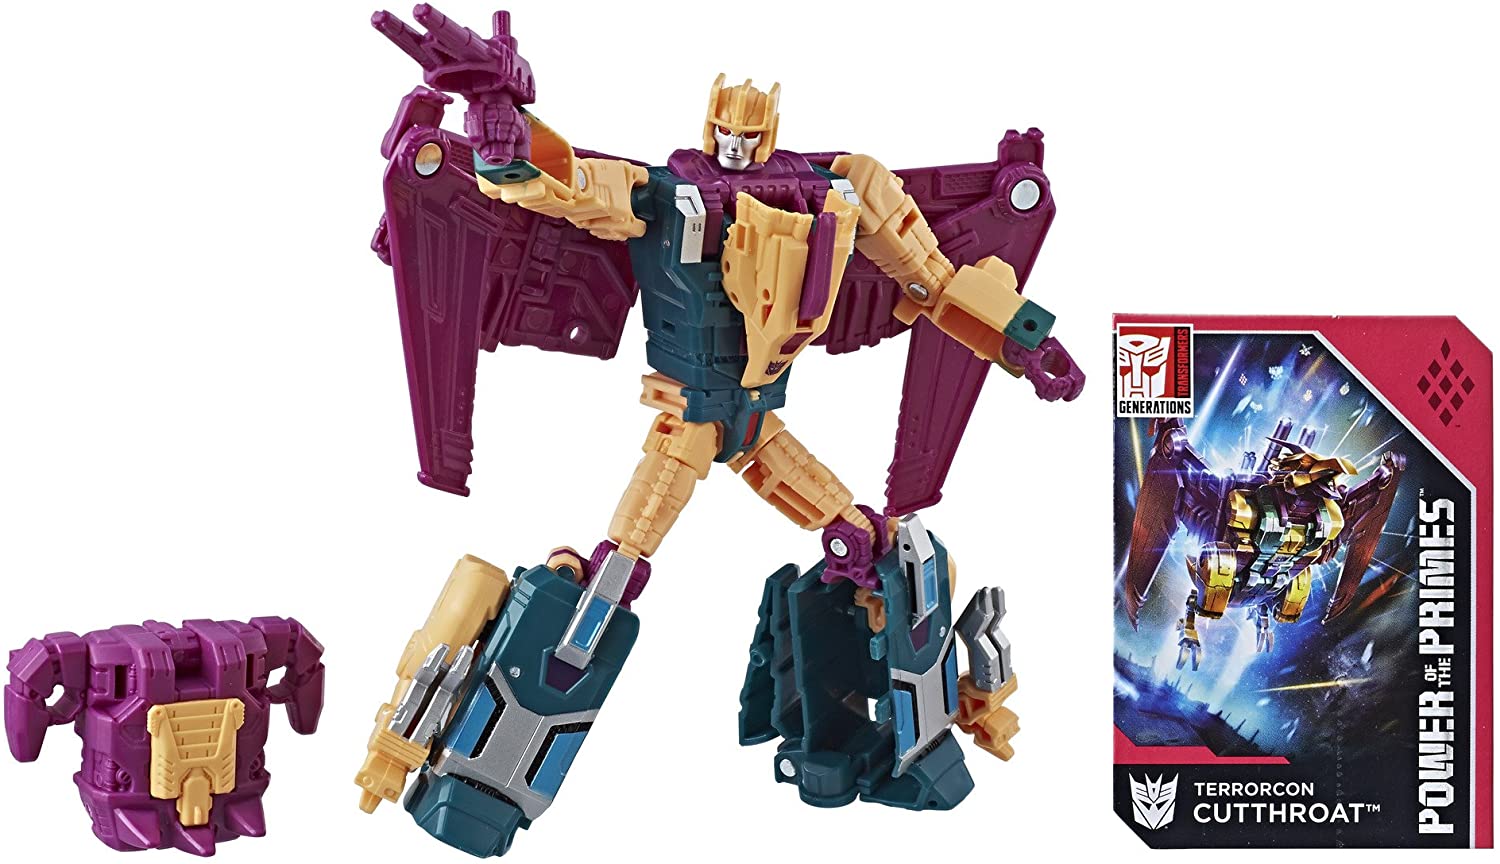 Transformers Generations Power of The Primes Deluxe Terrorcon Cutthroat